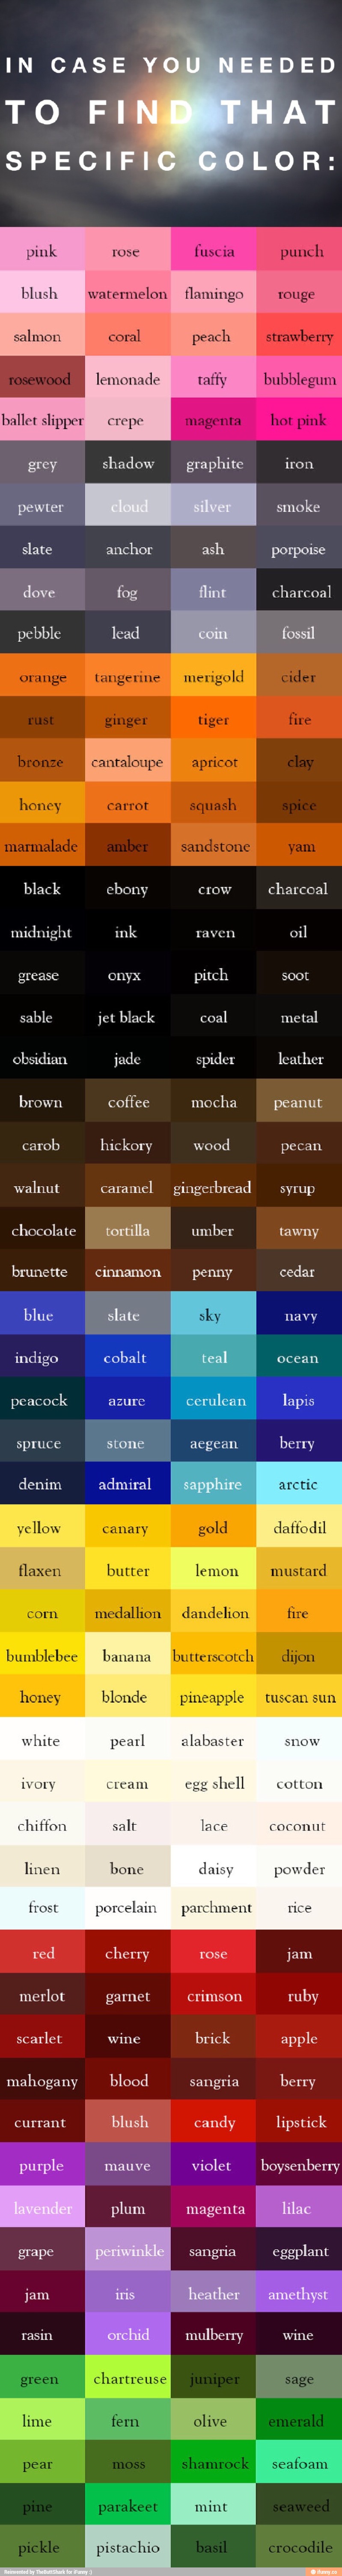 In Case You Need To Find That Specific Color